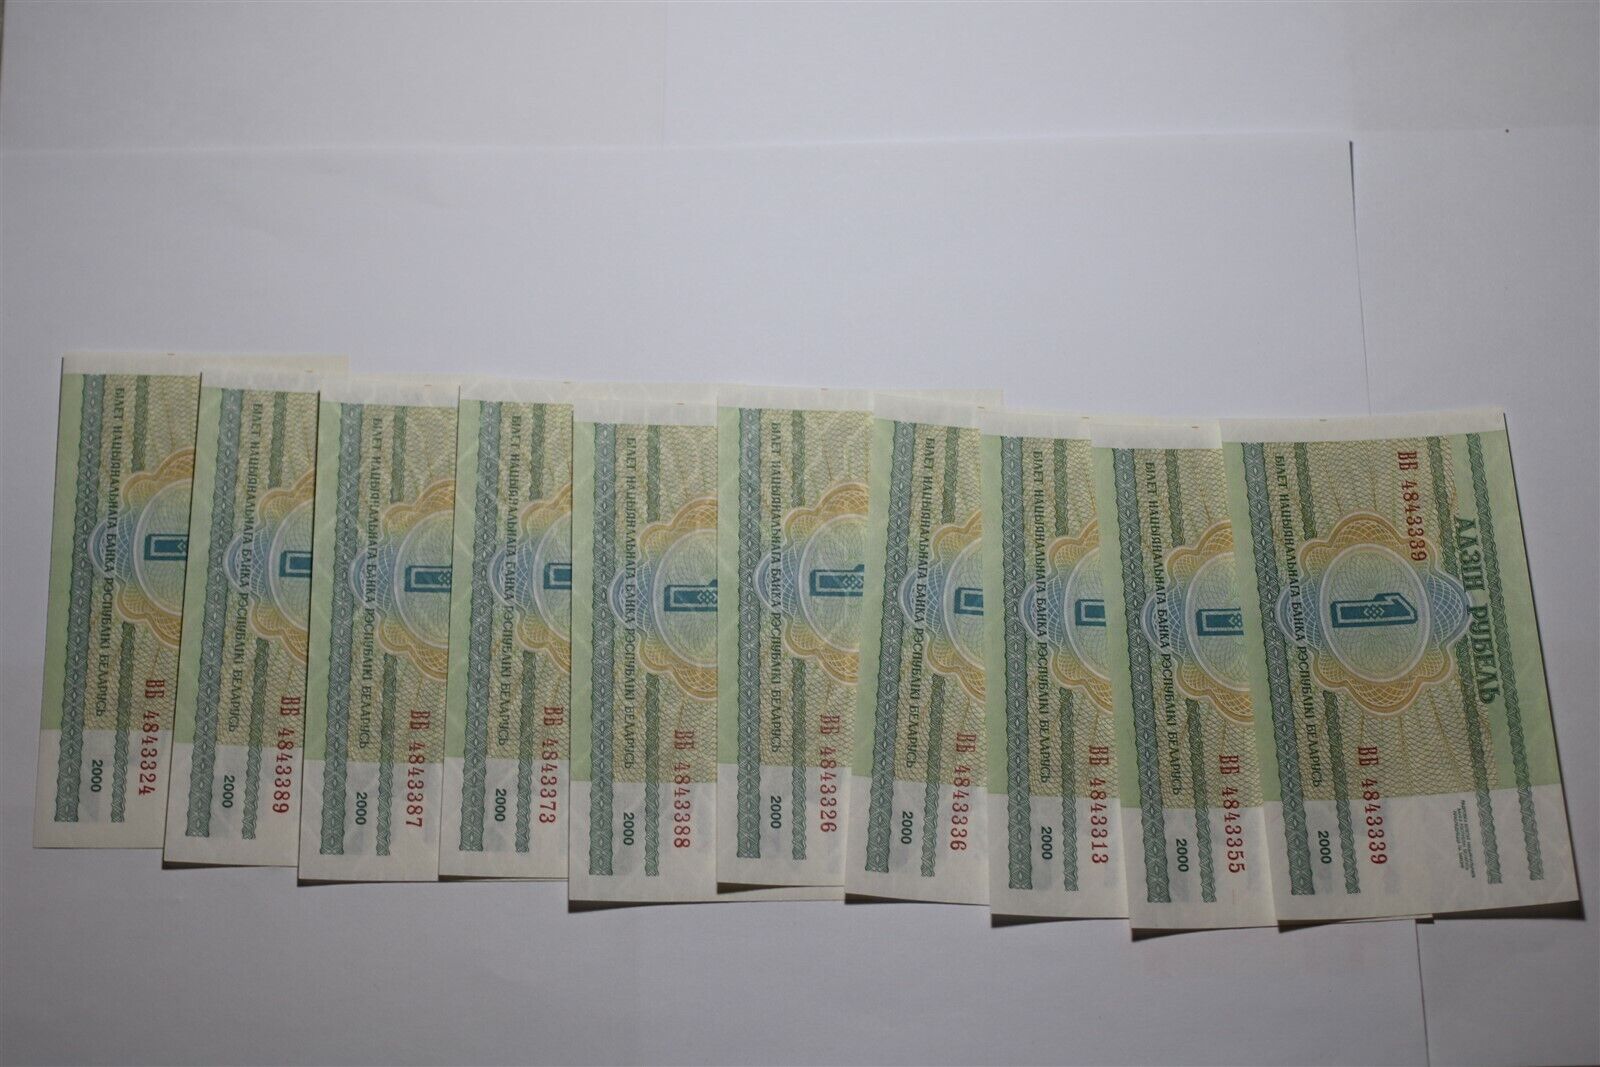 BELARUS 1 ROUBLE 10 BANKNOTES New Finally popular brand product HIGH B27 GRADE CX1-186